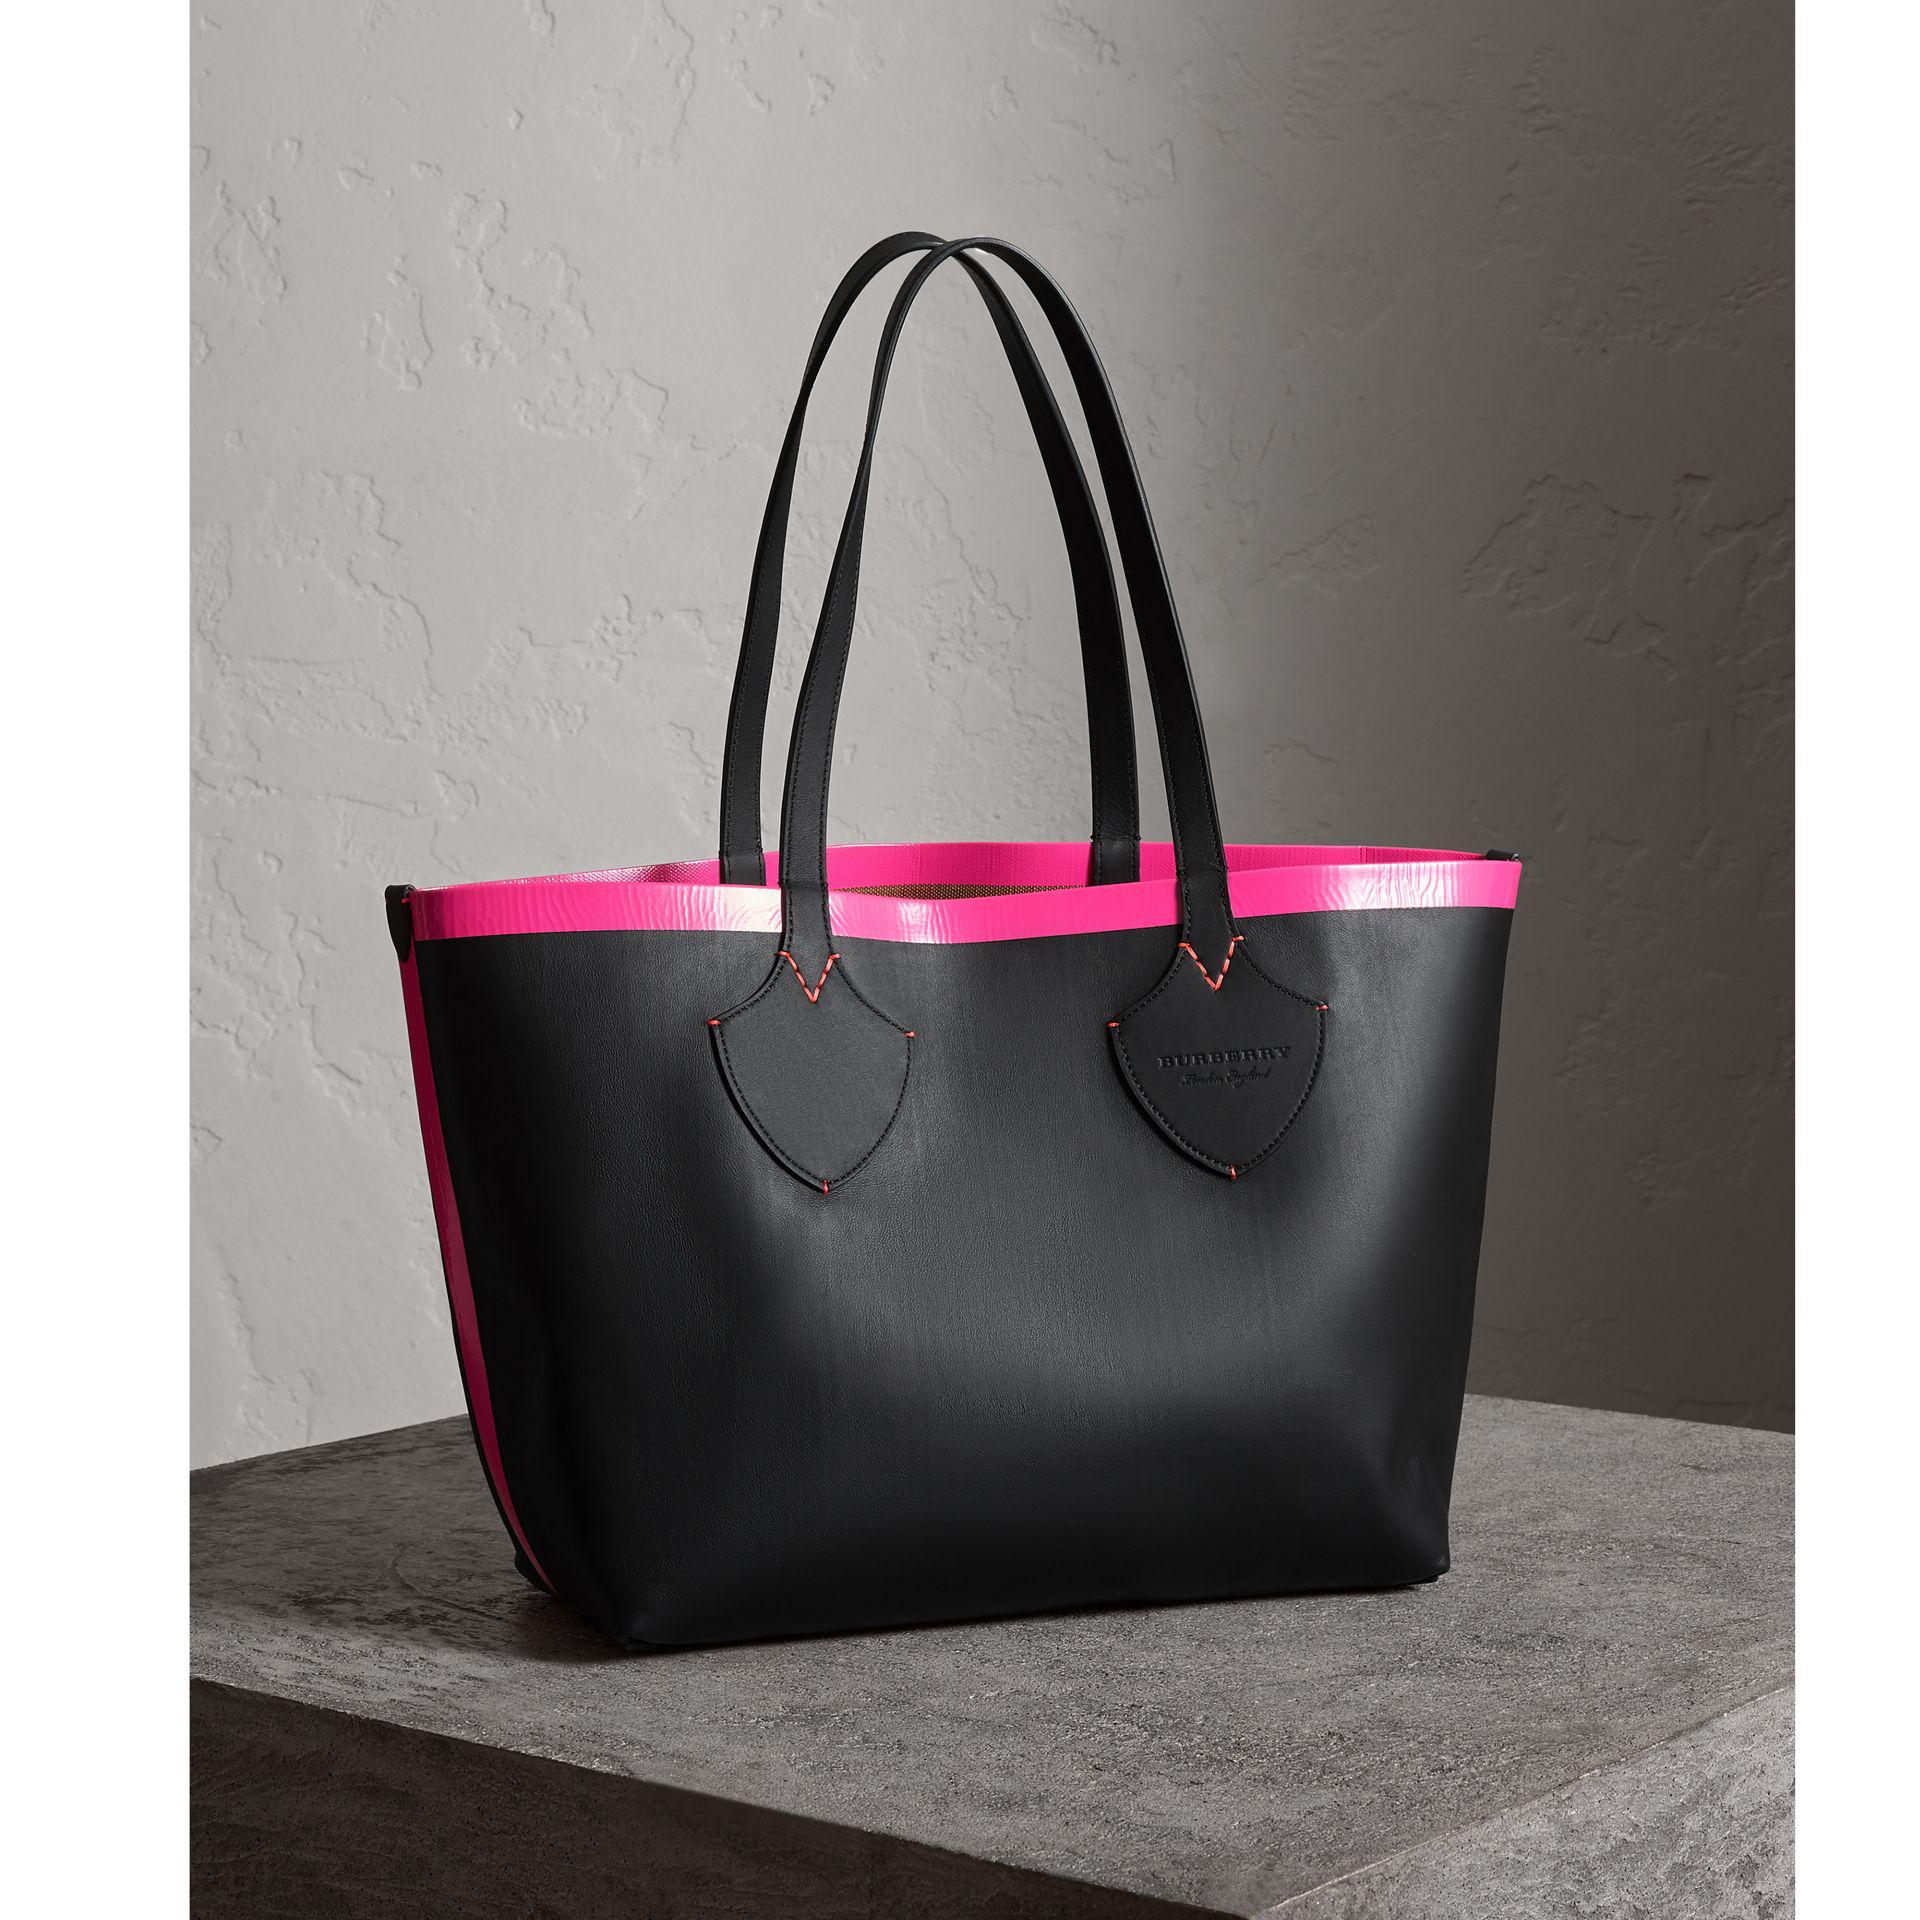 Totes bags Burberry - The Medium Giant reversible tote - 4065923